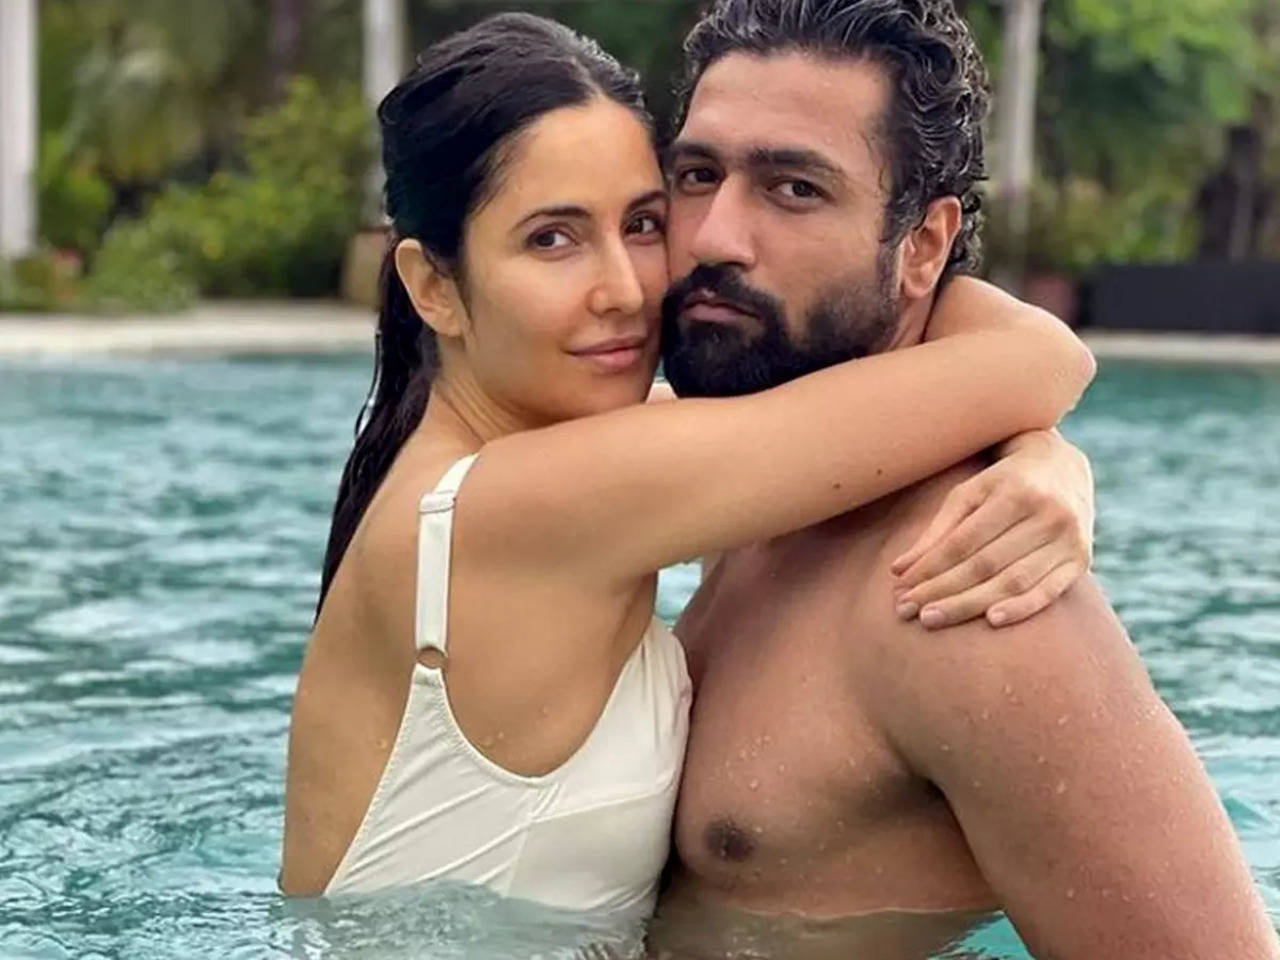 Katrina Kaif plays the possessive wife in steamy new pool pic with Vicky  Kaushal | Hindi Movie News - Times of India